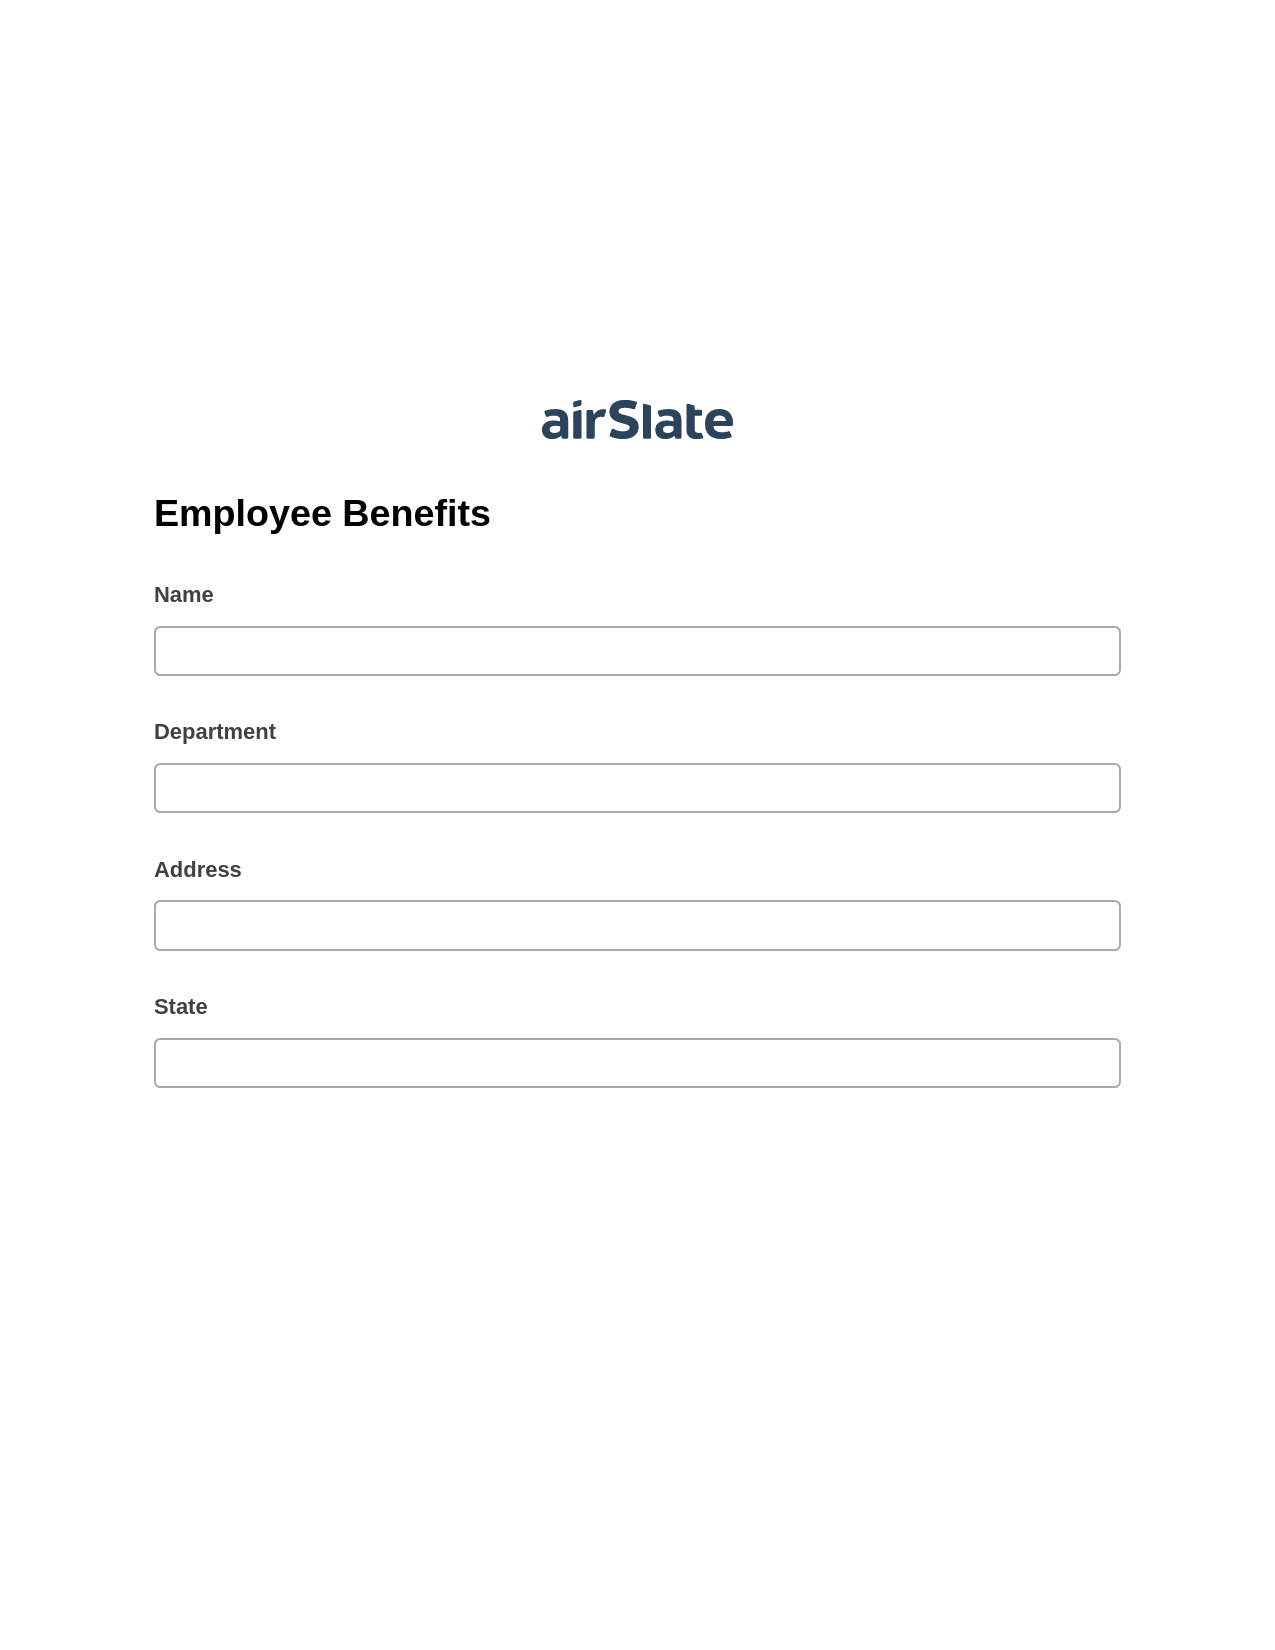 Employee Benefits Pre-fill from Salesforce Record Bot, Create NetSuite Records Bot, Export to Smartsheet